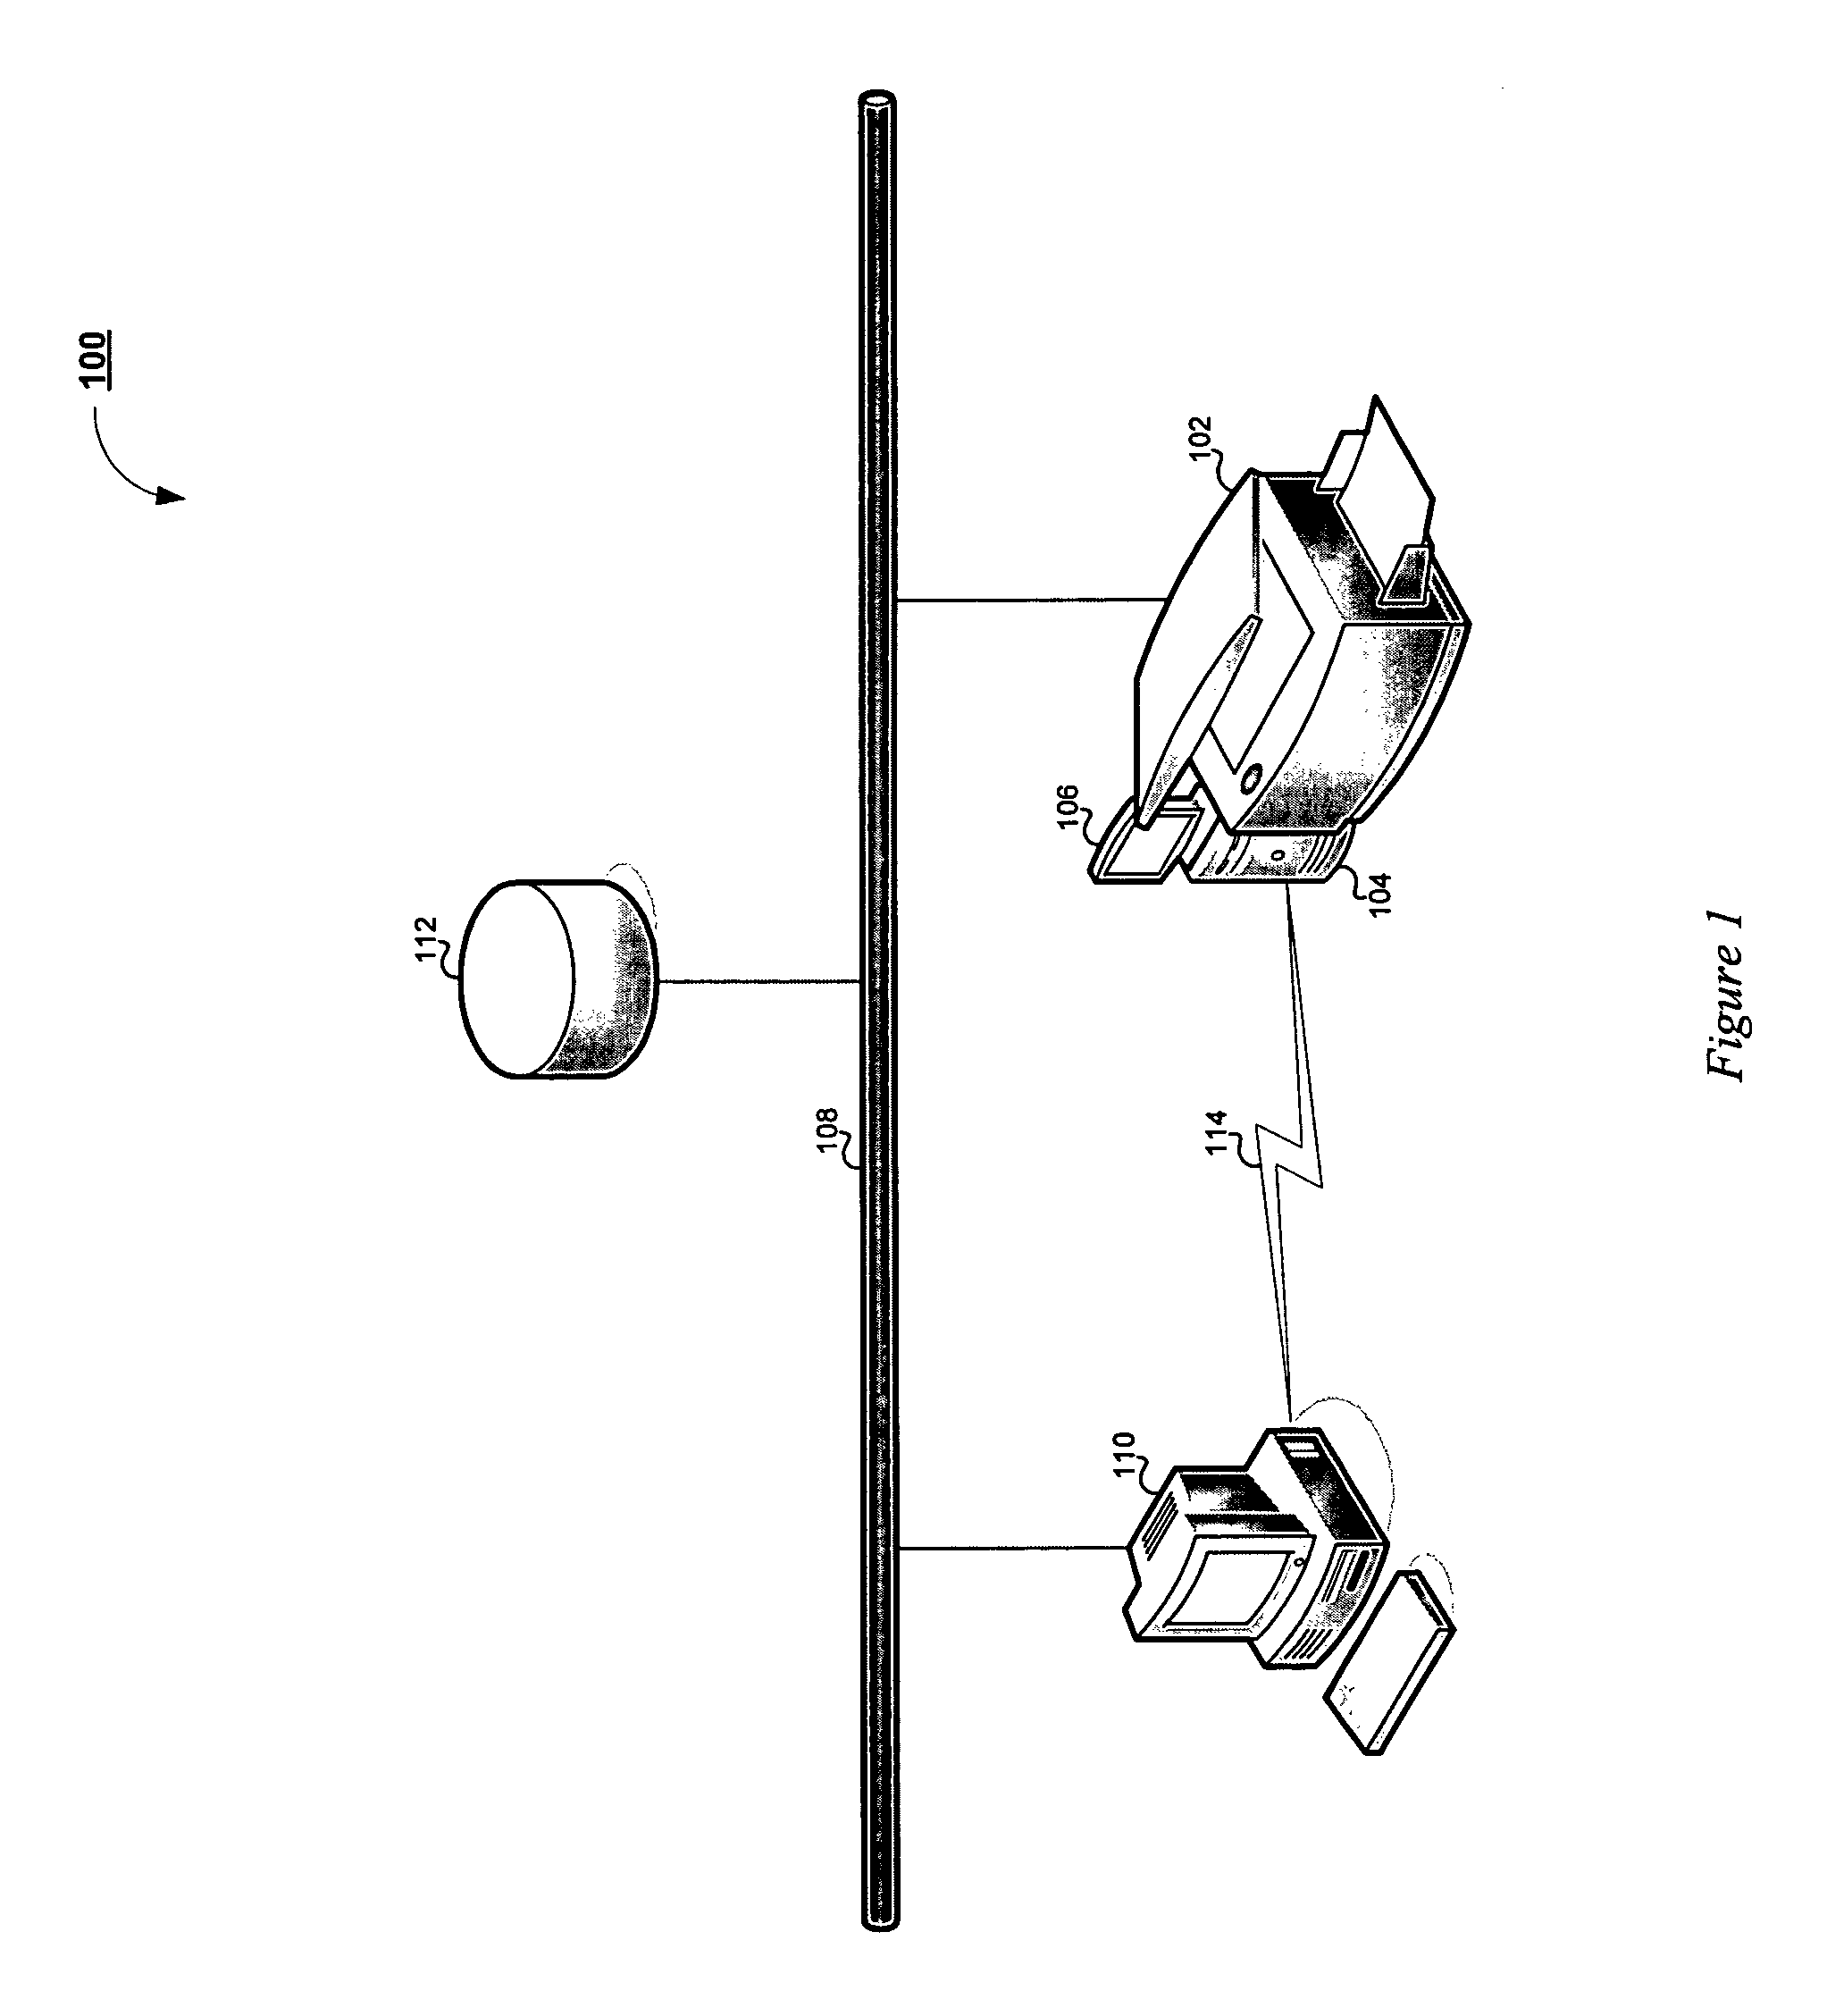 System and method for tracking feature usage in a document processing environment